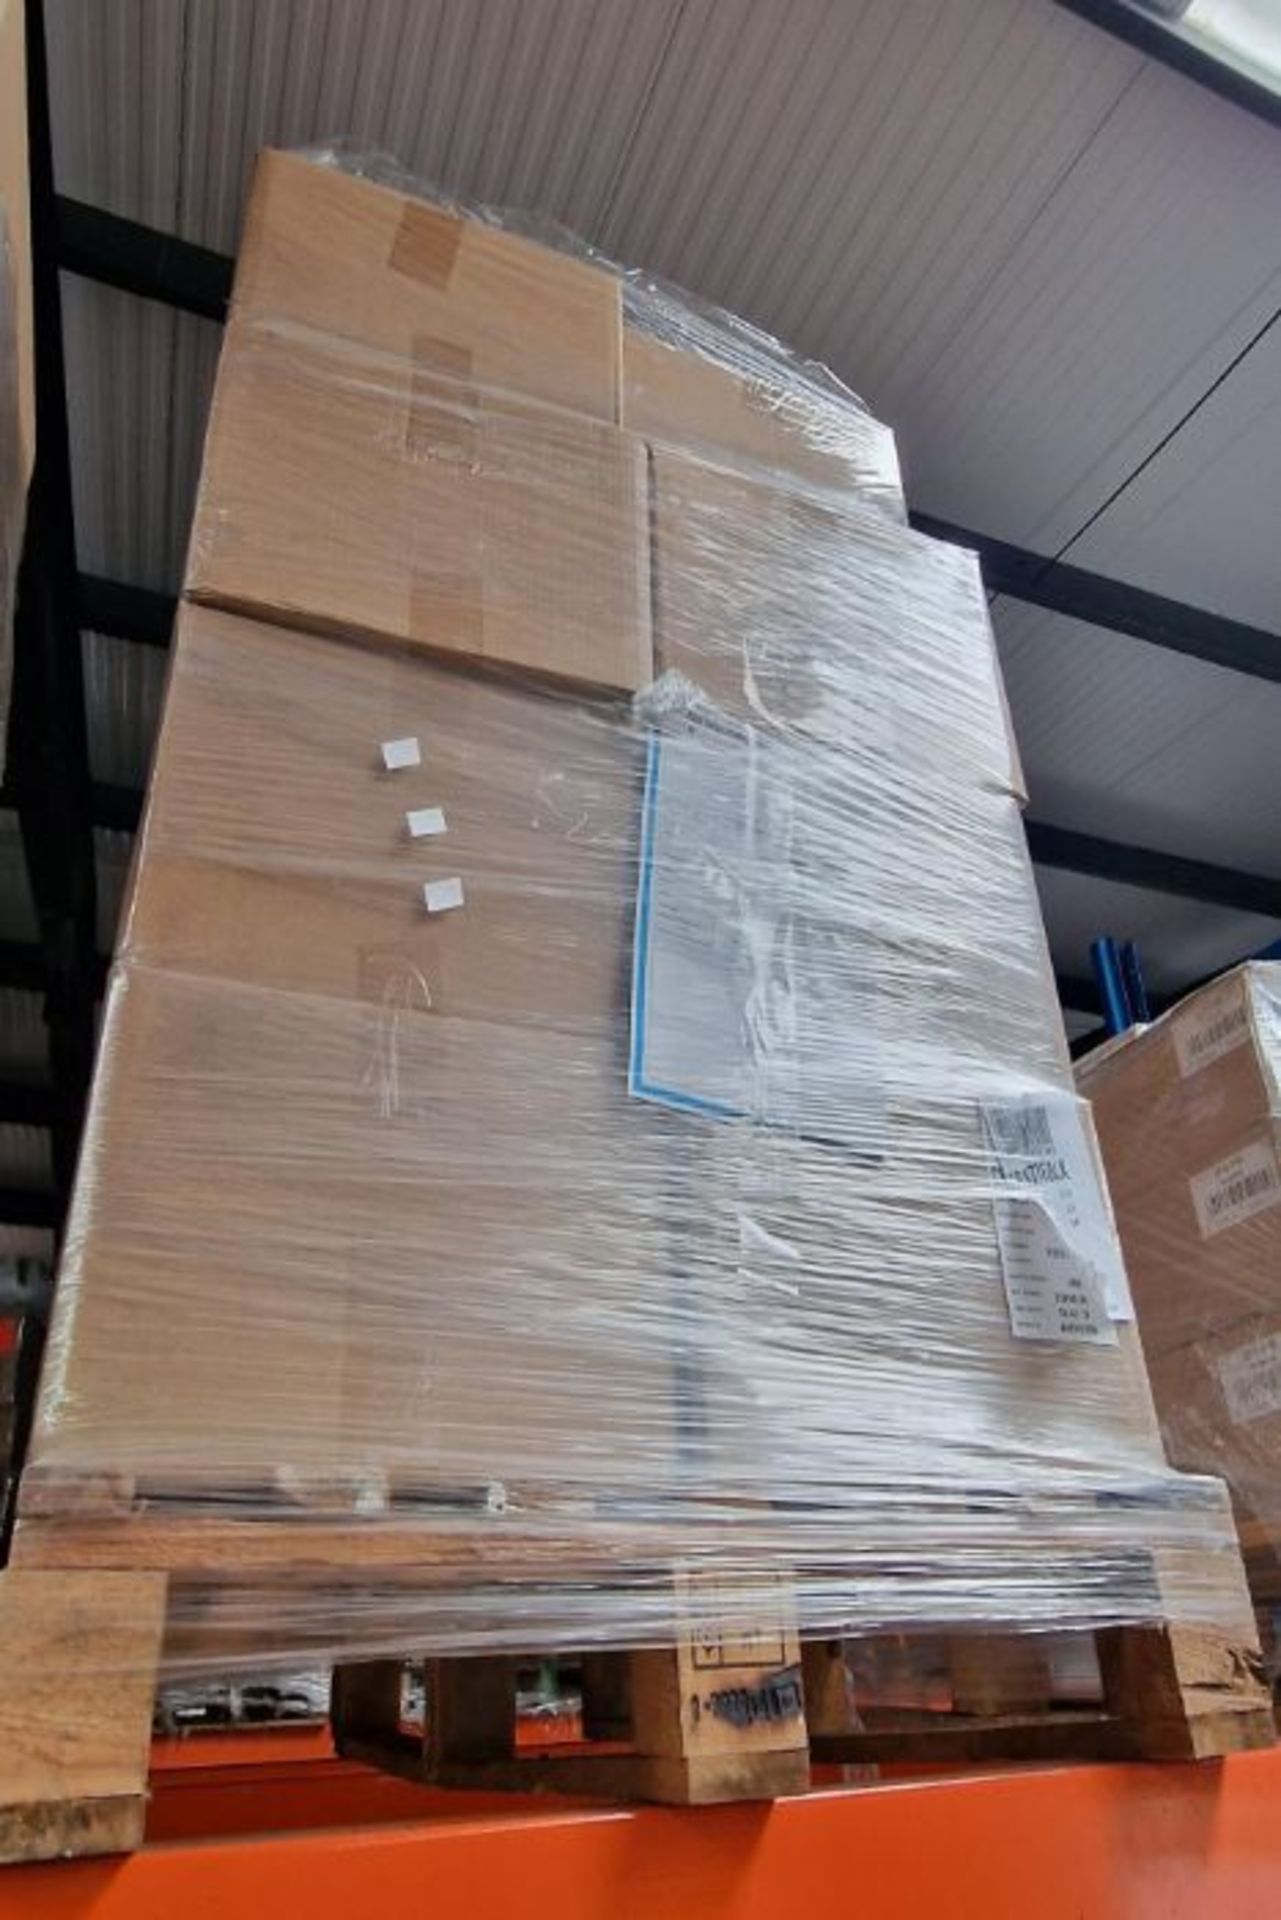 A pallet containing as new Otto large tape dispensers (CP1700Tblk)